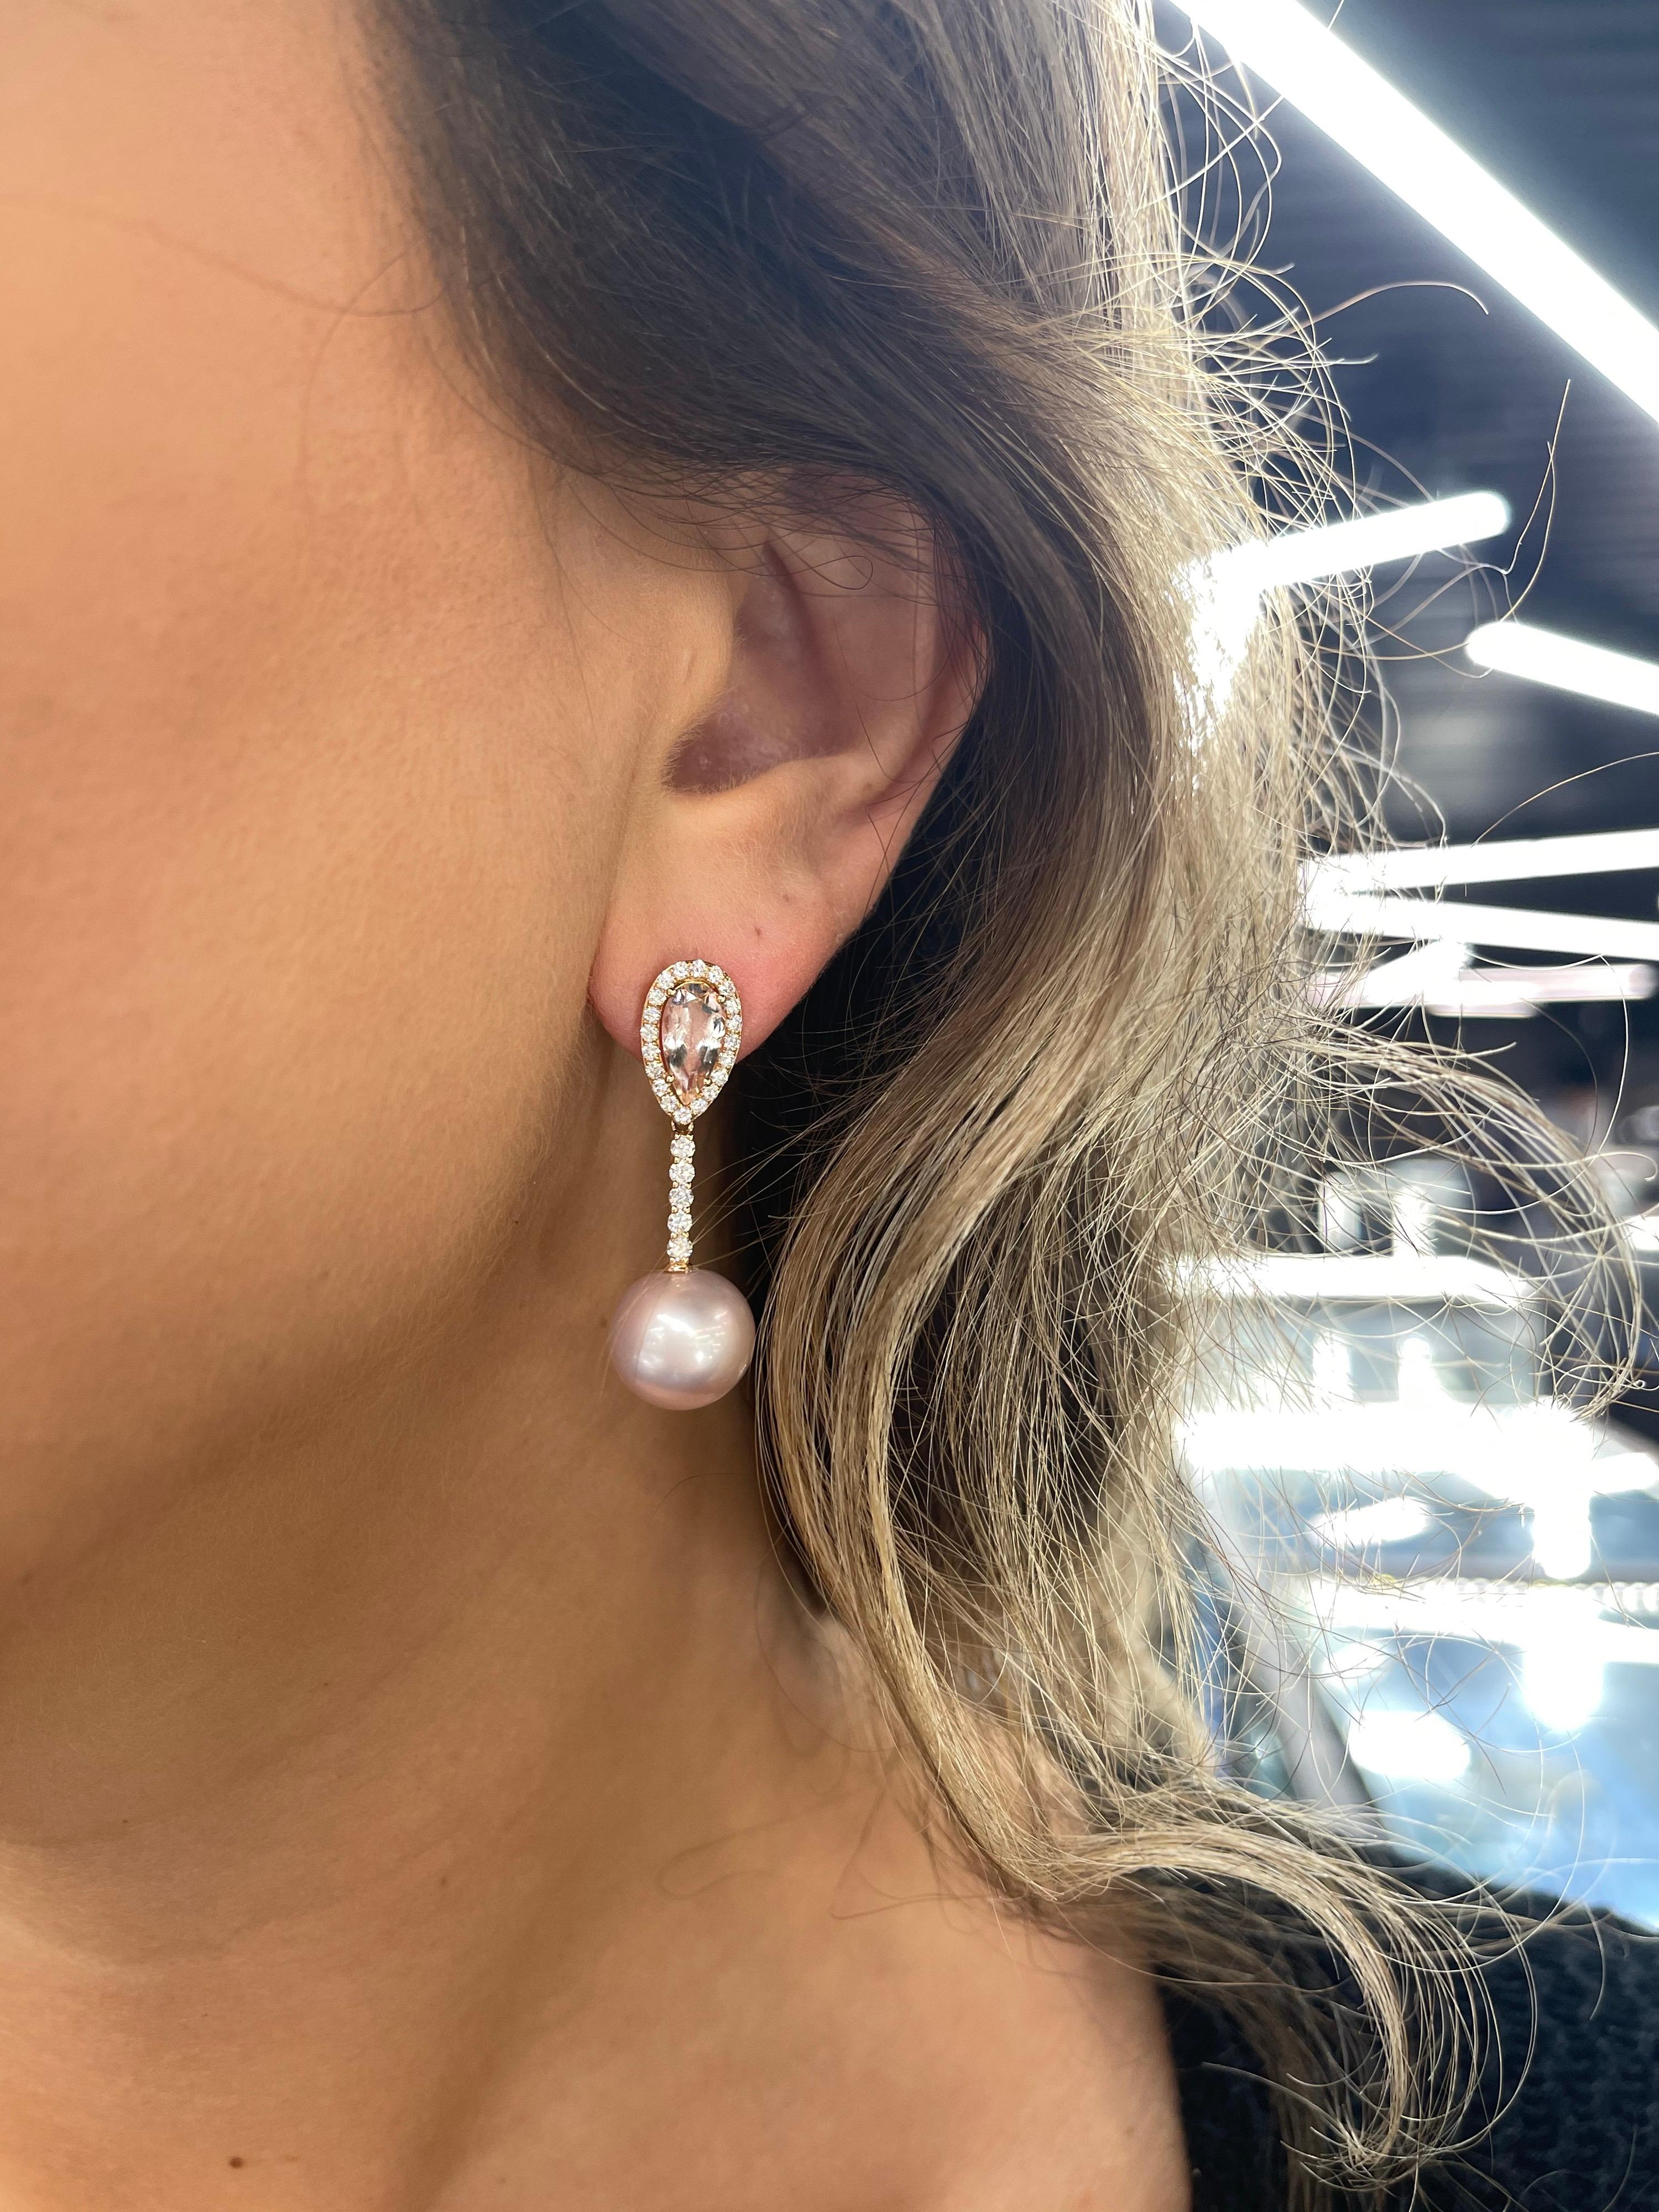 18 Karat Rose gold drop earrings featuring two Pear shape Morganite weighing 2.04 carats flanked with 50 round brilliants weighing 0.76 carats and two Pink Freshwater Pearls measuring 12-13 MM.
